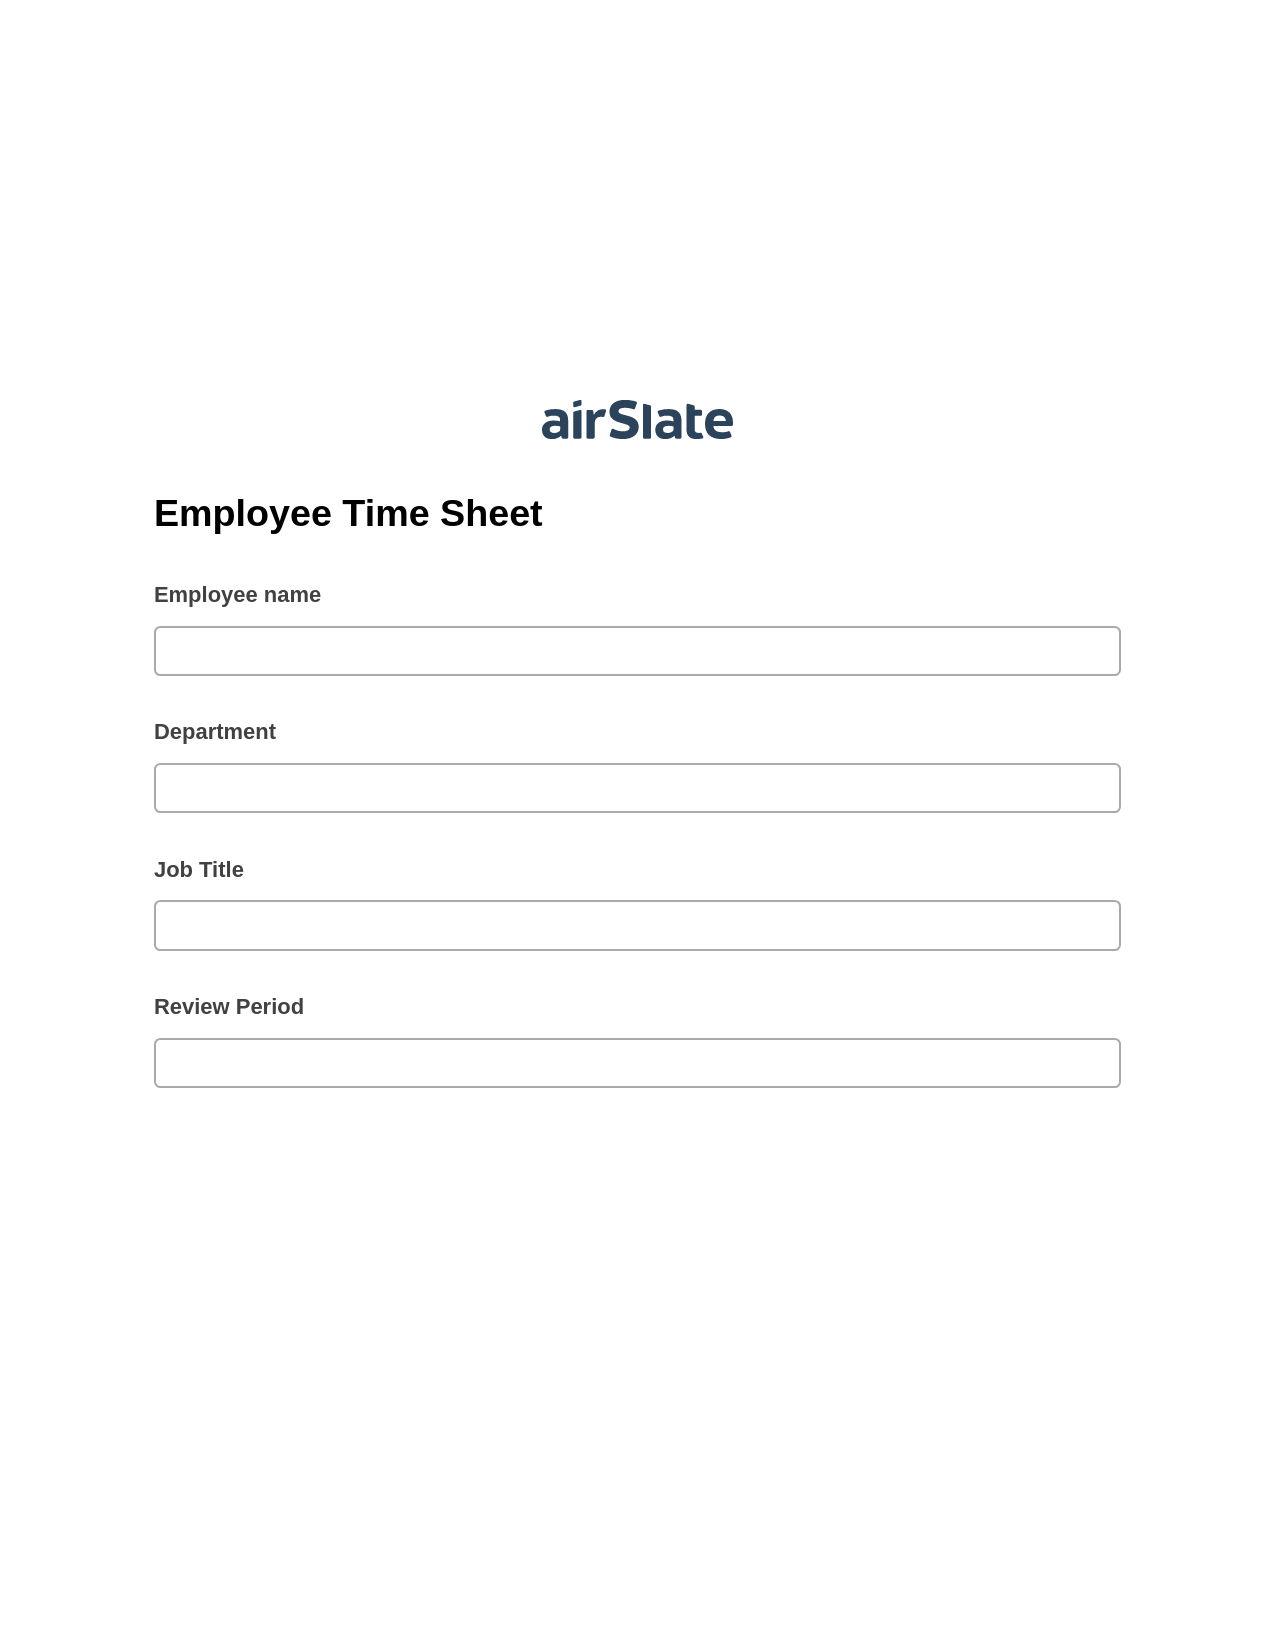 Employee Time Sheet Pre-fill from Office 365 Excel Bot, Export to MS Dynamics 365 Bot, Export to WebMerge Bot